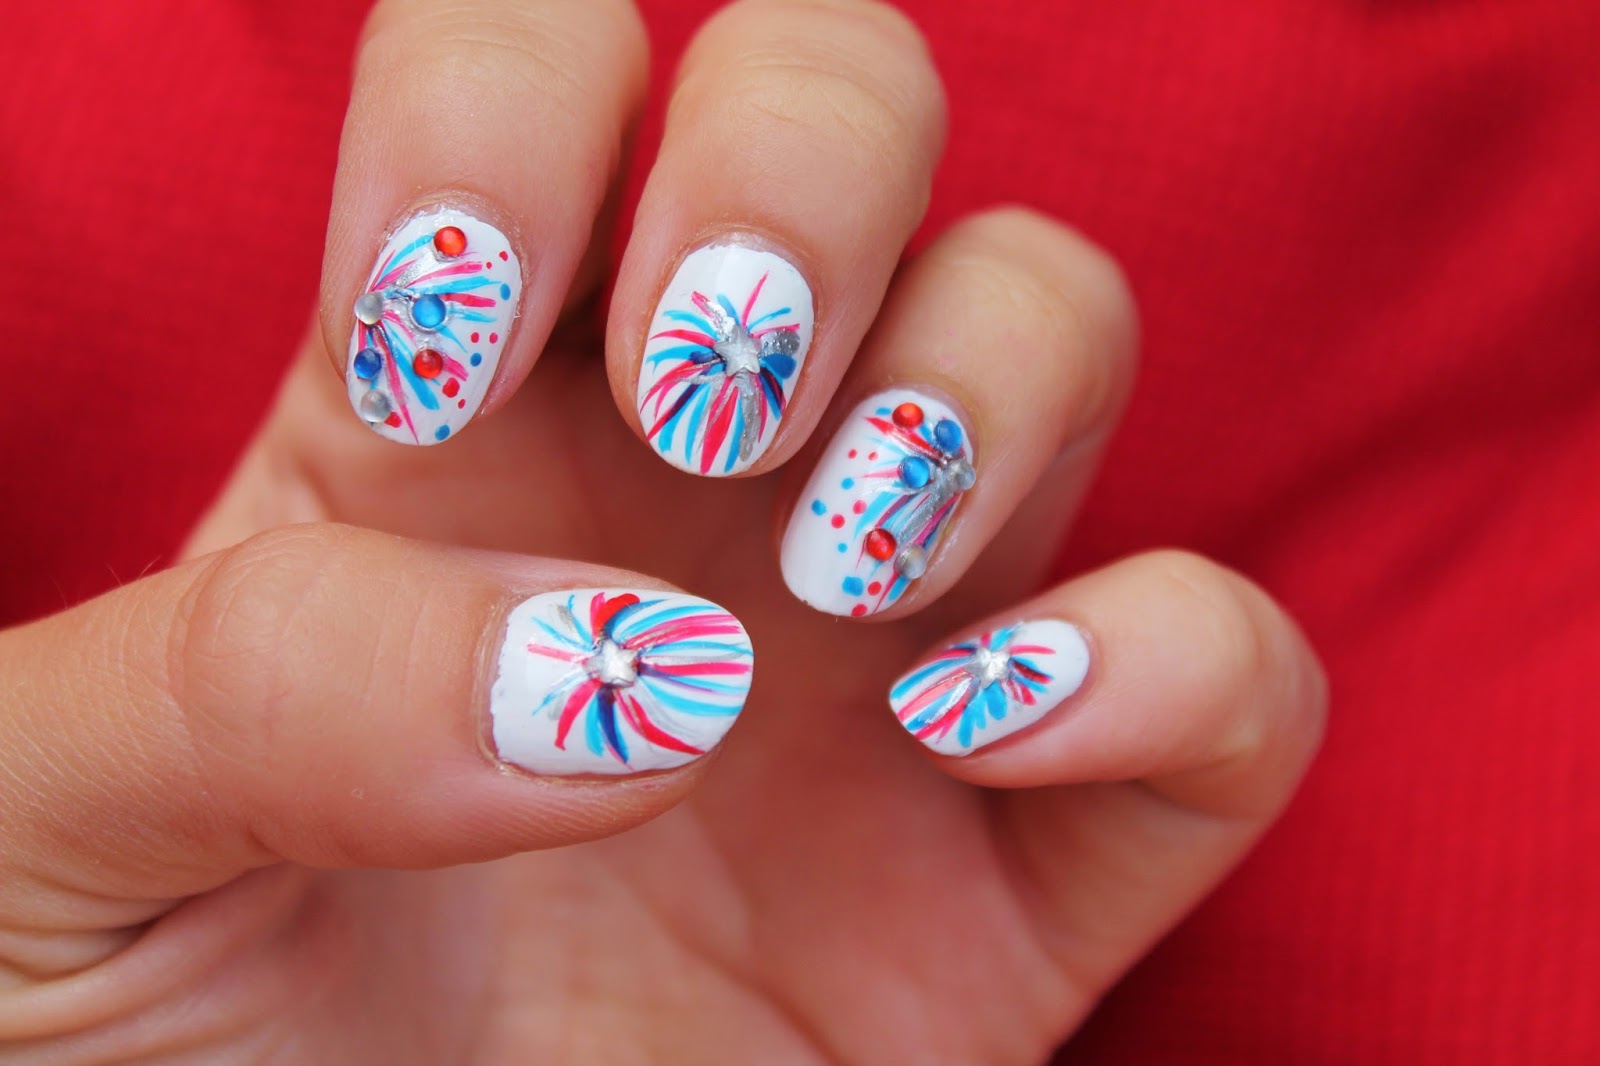 7. Fourth of July Nail Art: Stars and Stripes Nail Designs - wide 4